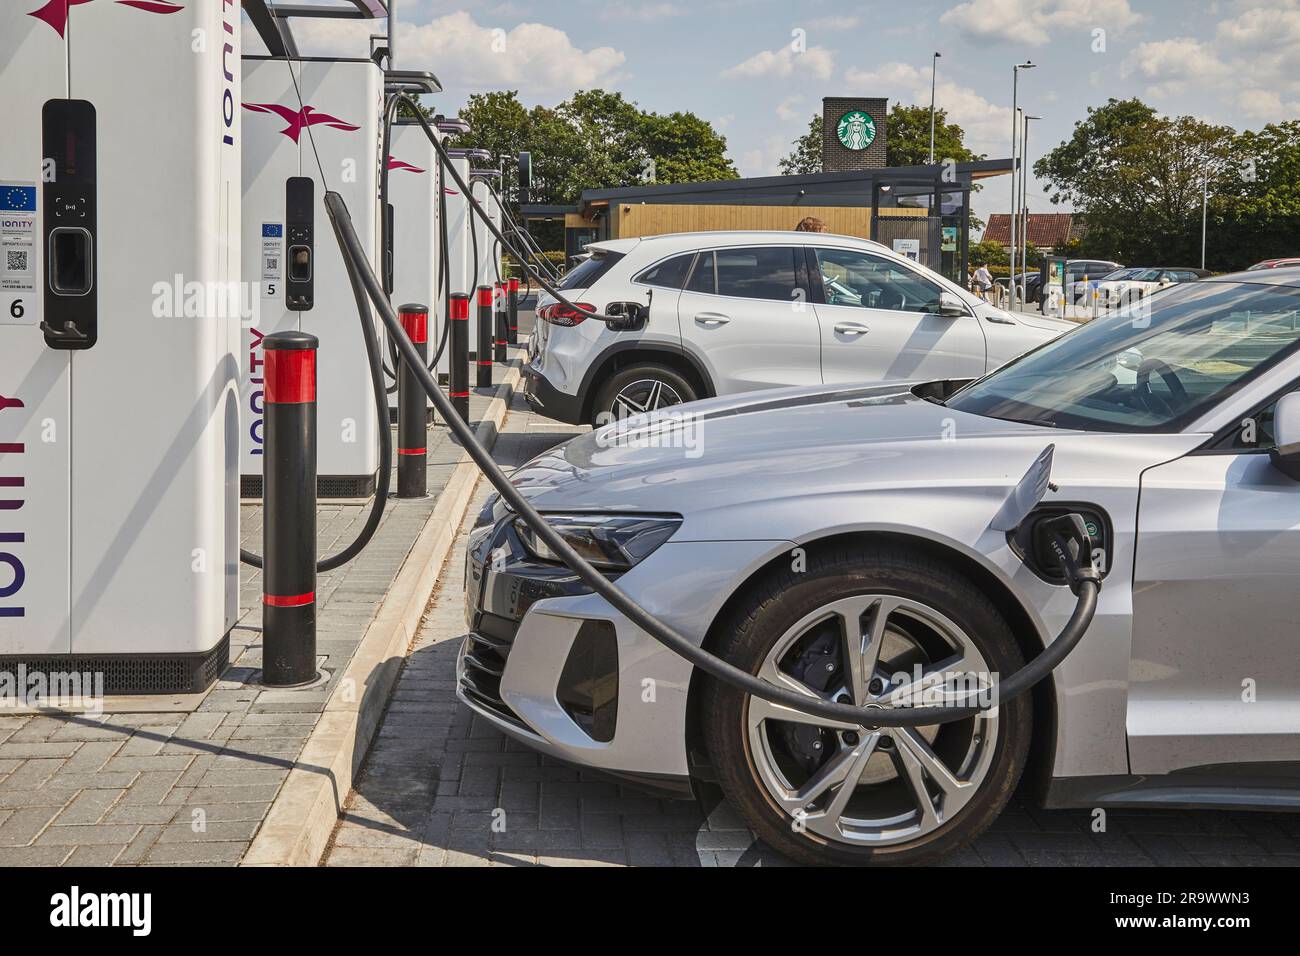 The future is here: electric vehicles charging at an electric vehicle (EV) charging station; near Stafford, England, Great Britain. Stock Photo